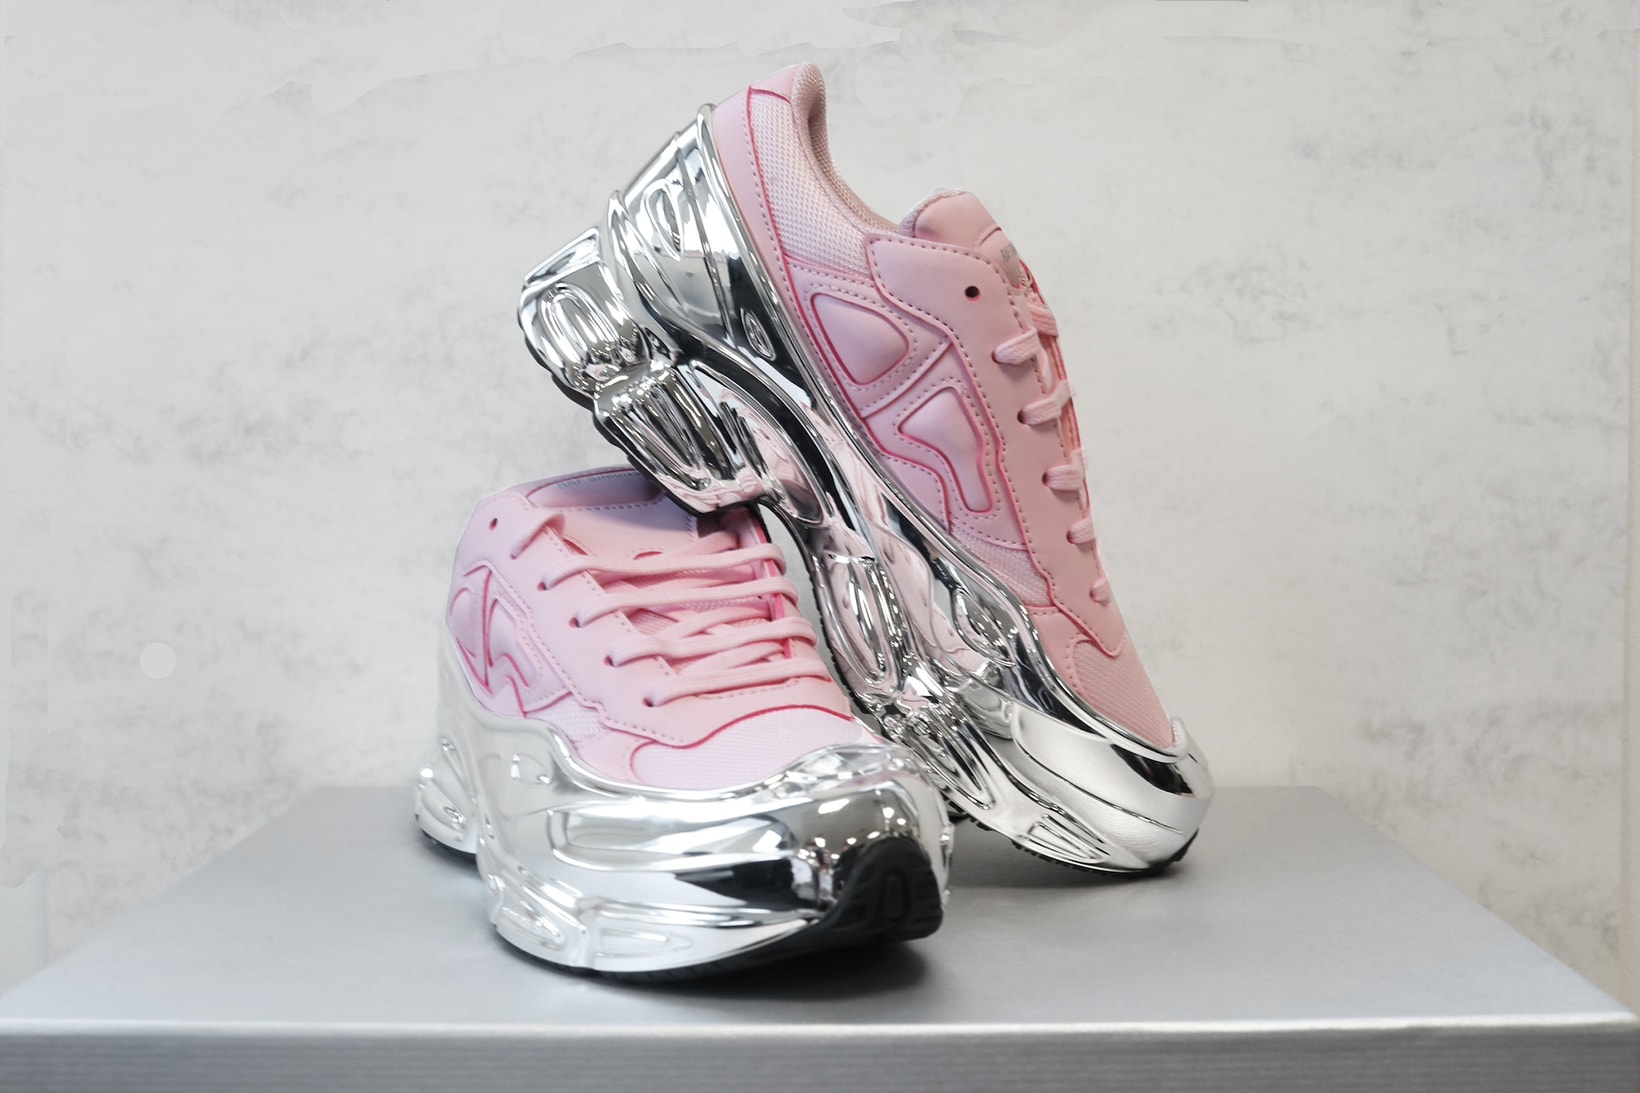 adidas originals Raf Simons RS Ozweego pastel Pink Metallic Mirror Silver Sole Sneakers Trainers